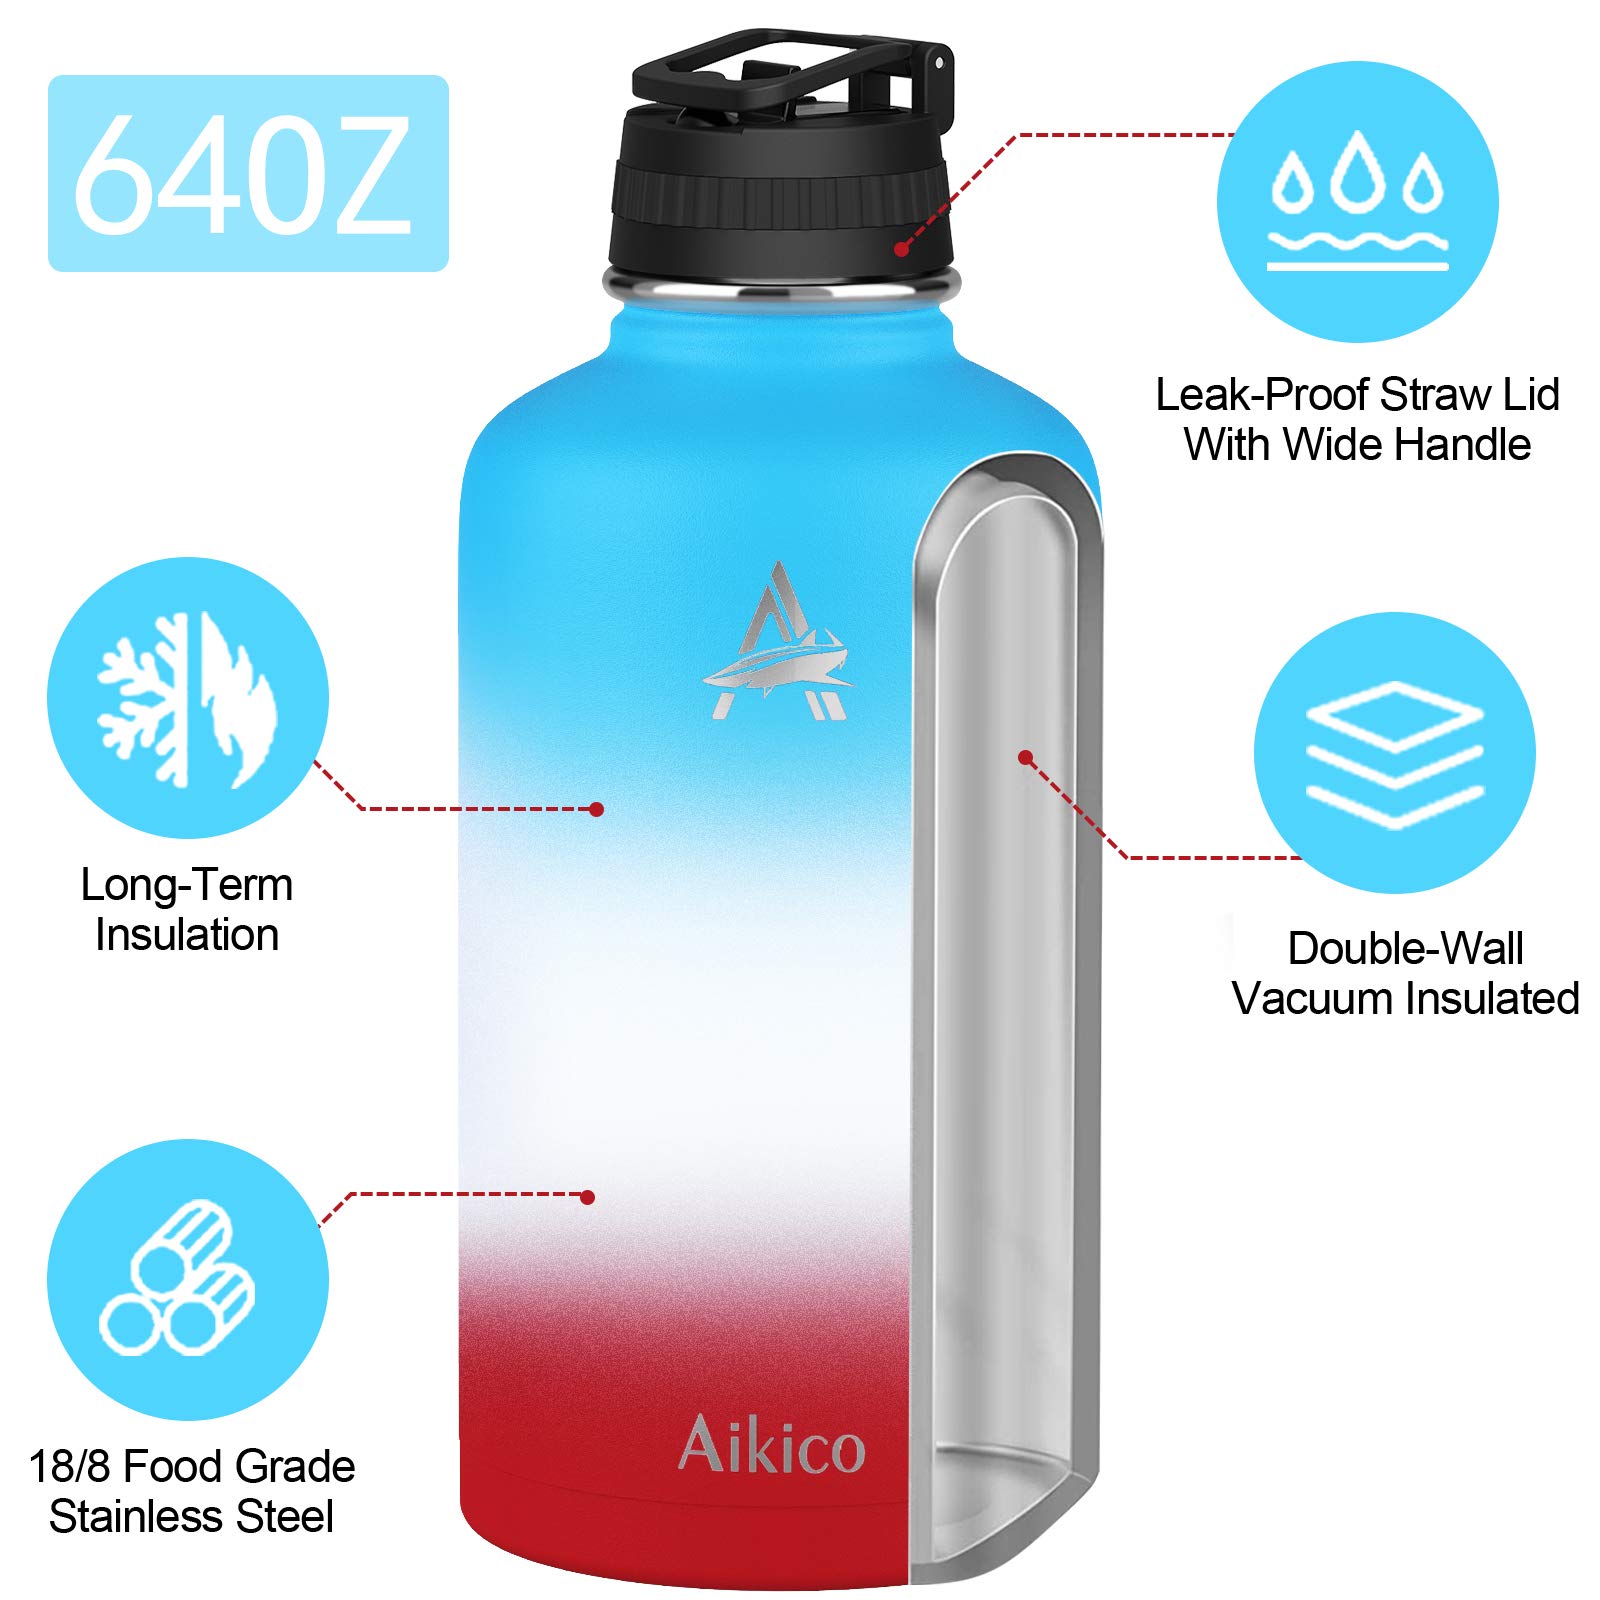 64oz Sports Water Bottle, Aikico Stainless Steel Water Bottle with Straw Lid, Double Vacuum Insulated Thermos Mug, Reusable Wide Mouth Flask Thermos for Hot and Cold Drinks(Sorbet)